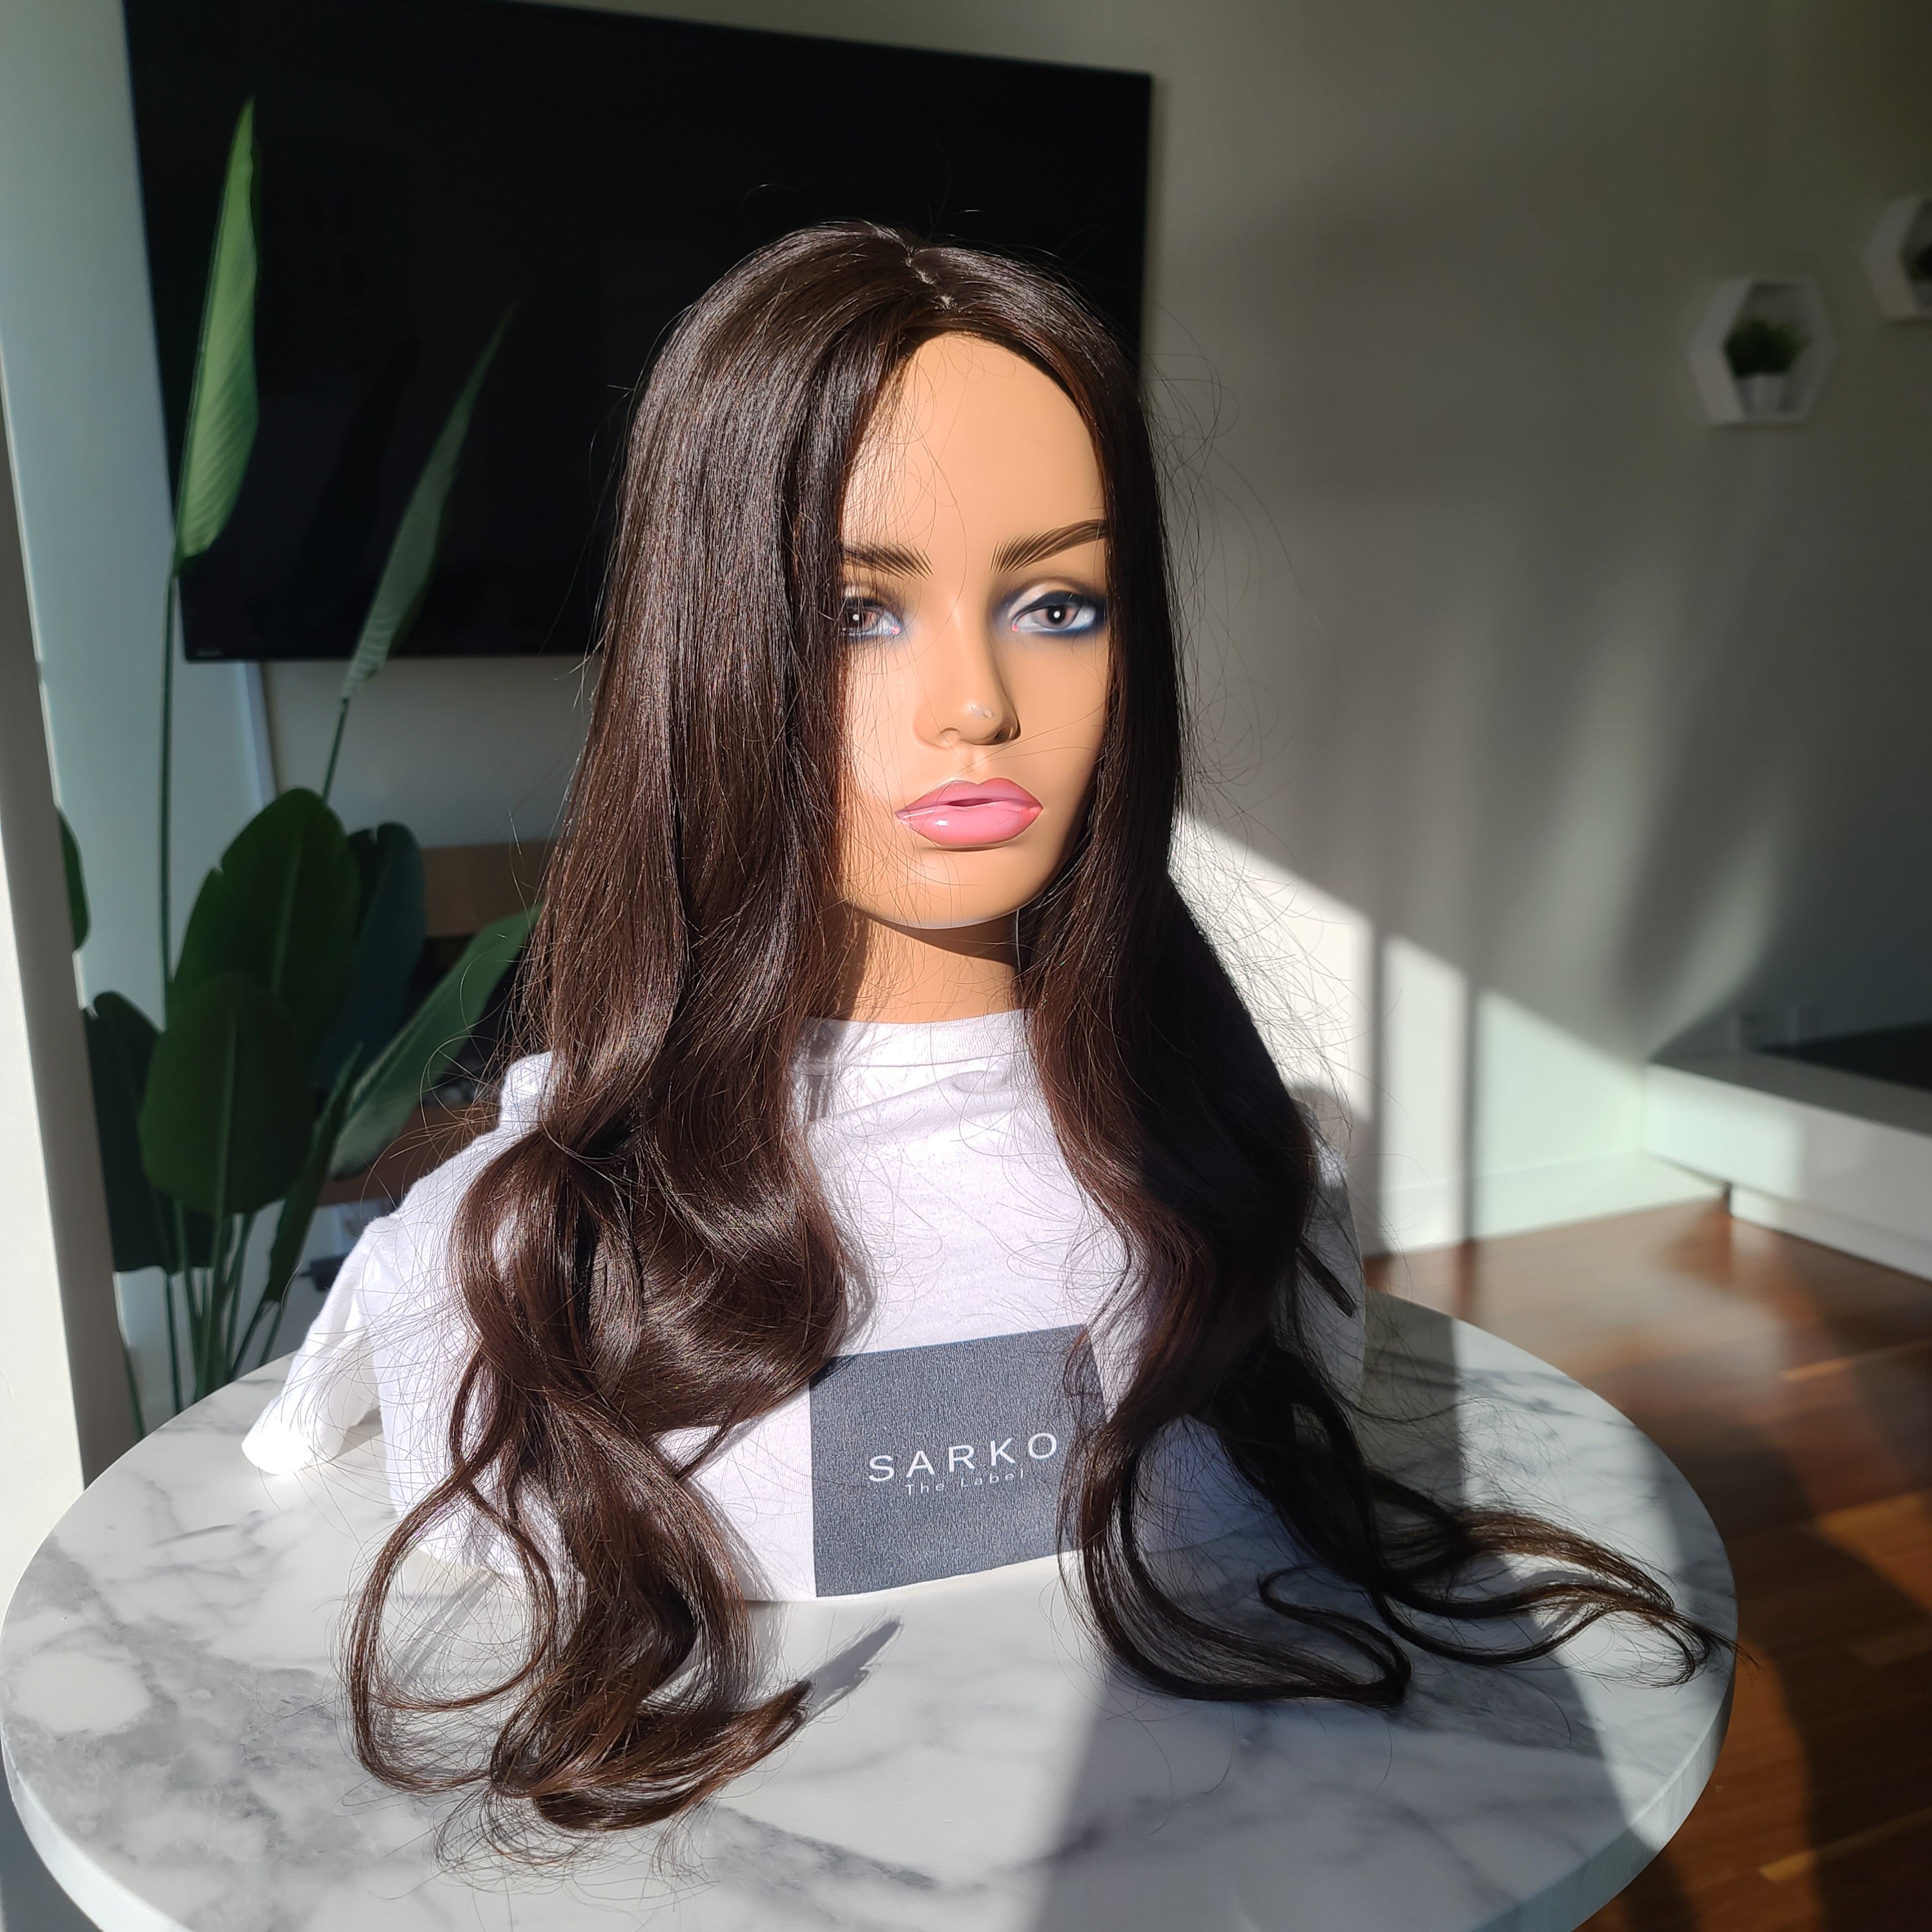  Fine Hair Brush To 23 Inches The Wear Hair And Perfect And  Long Combination Of Make Fuller Your Hair Hair And Luxurious Long Can Is  Easy Mannequin Head Hair Styling